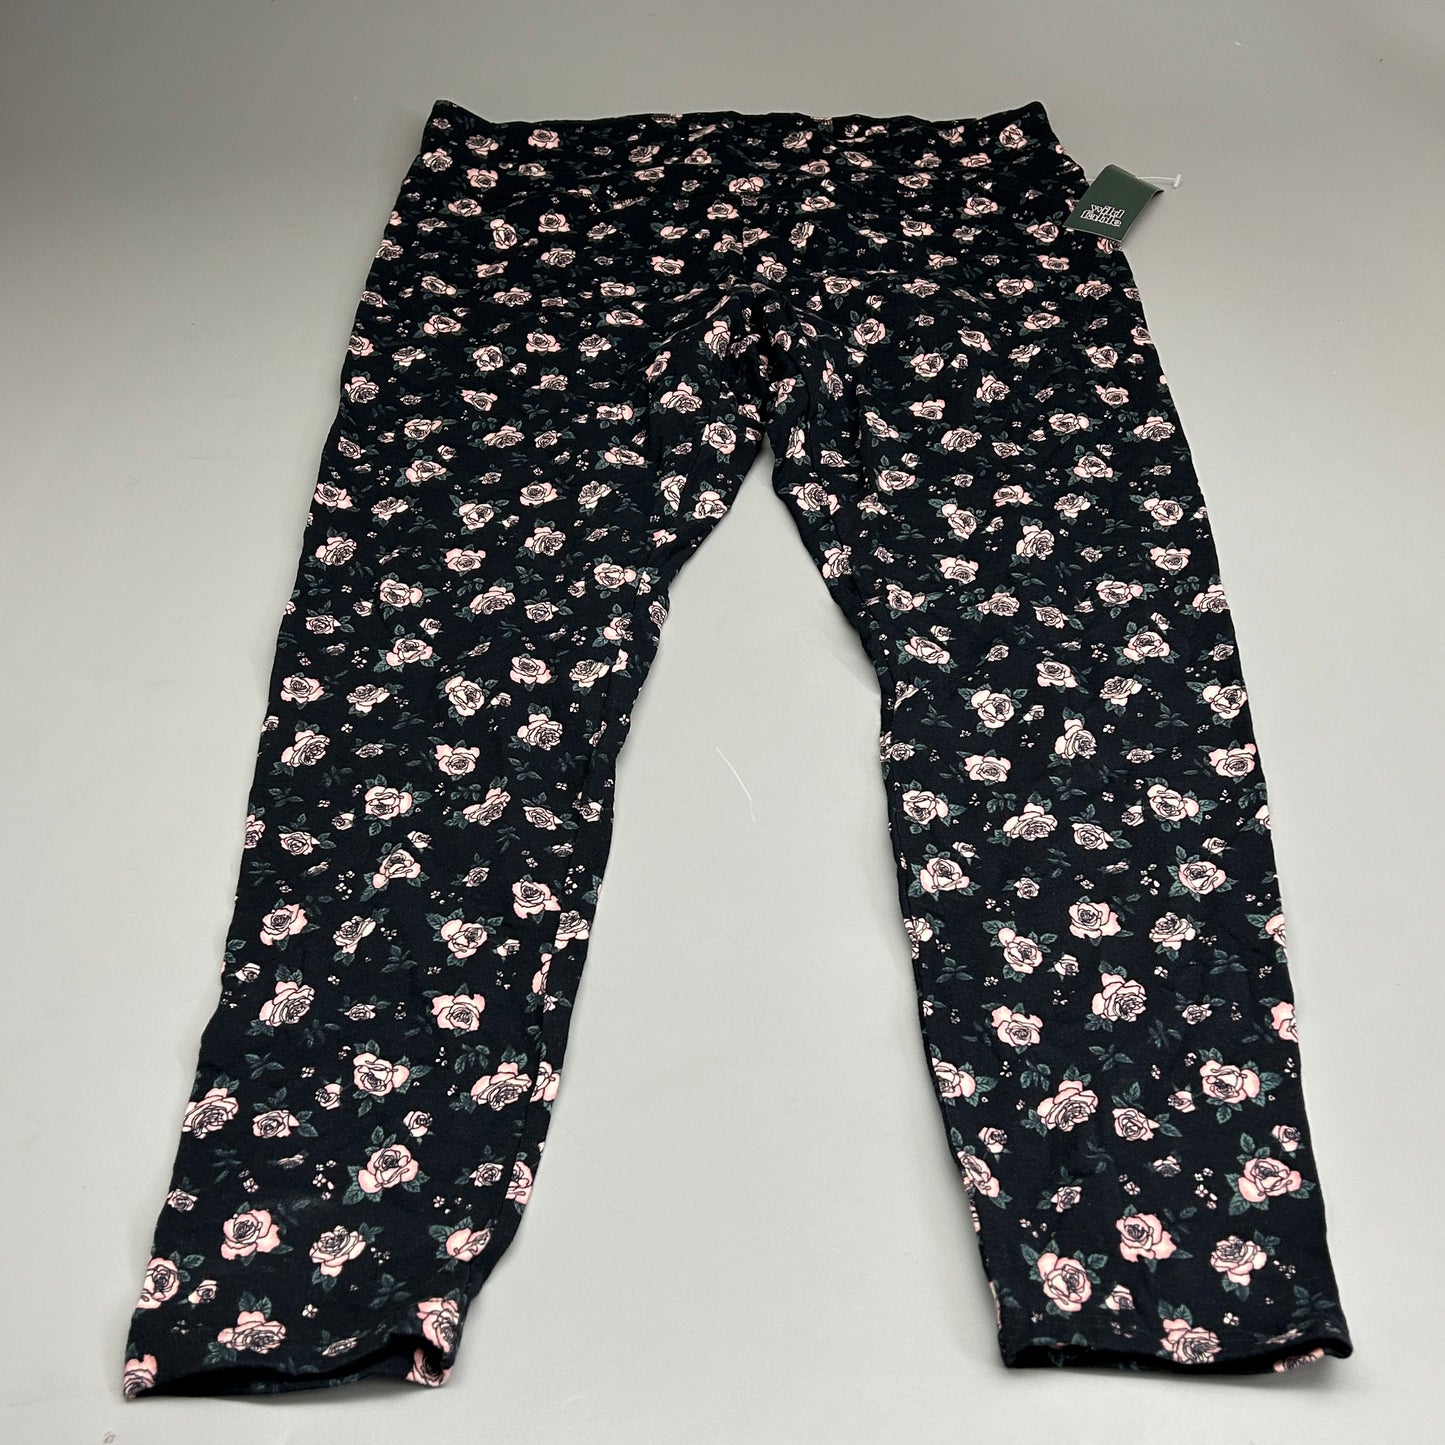 WILD FABLE Women's Plus Size High-Waisted Classic Leggings Black Floral 1X (New)